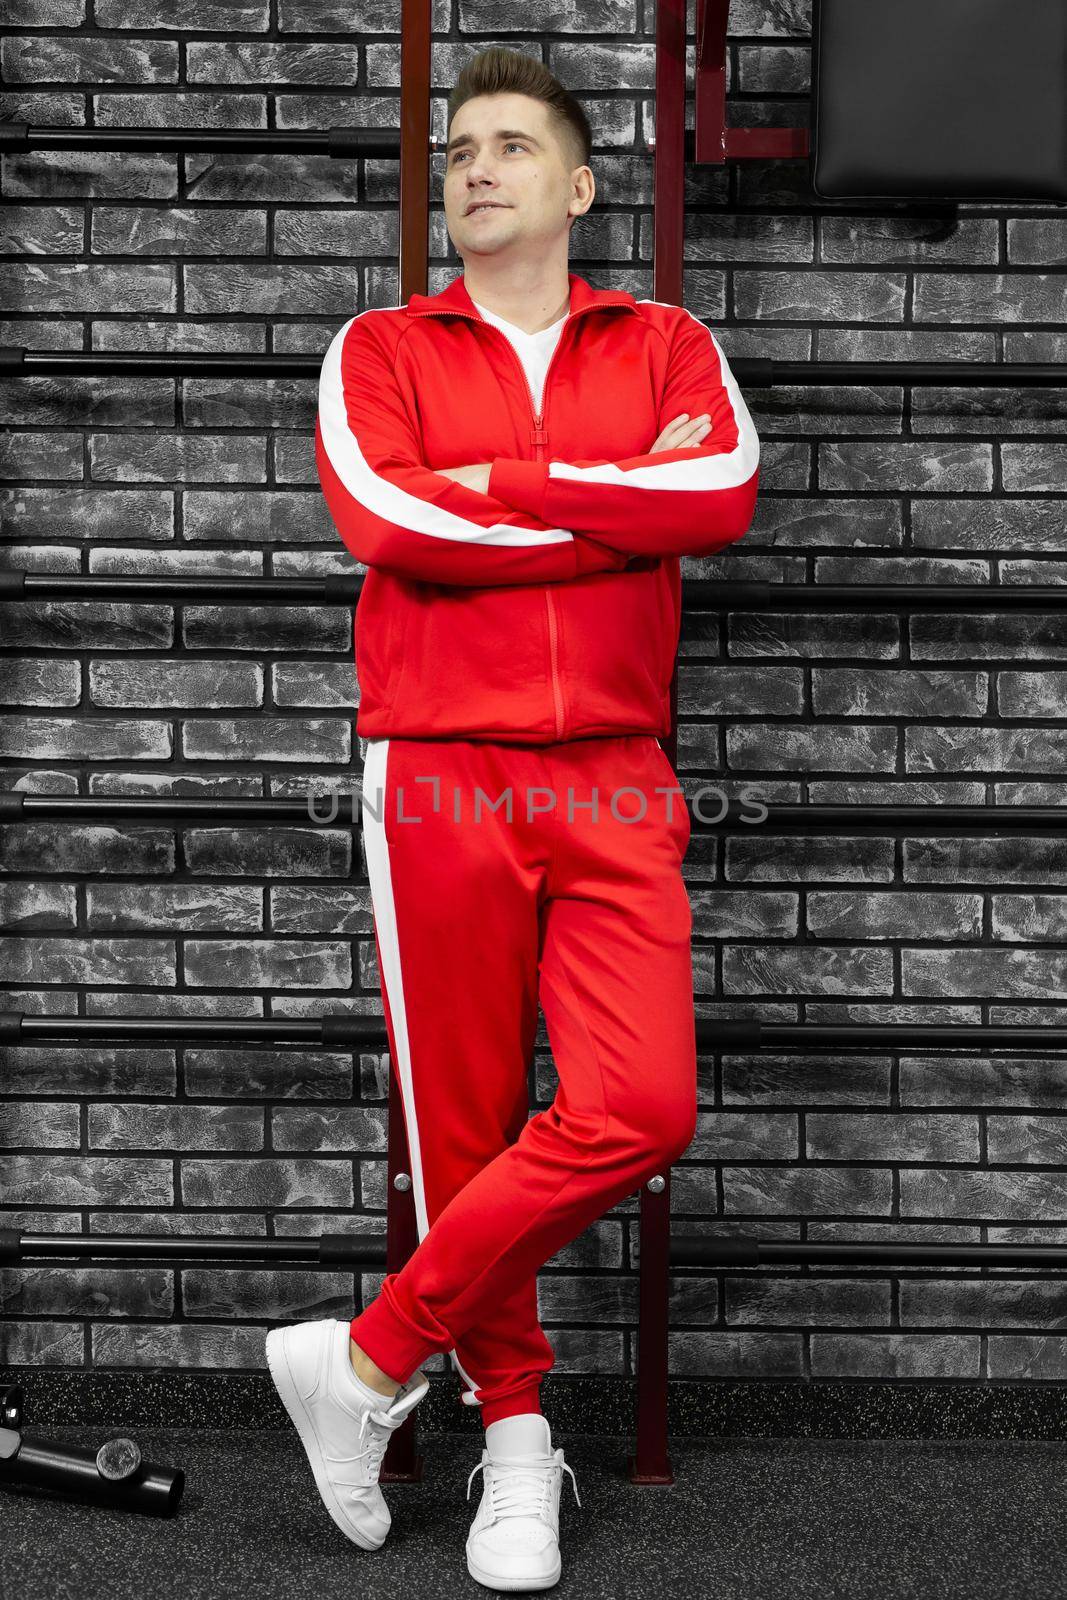 Man in a red tracksuit poses against the wall of the gym.